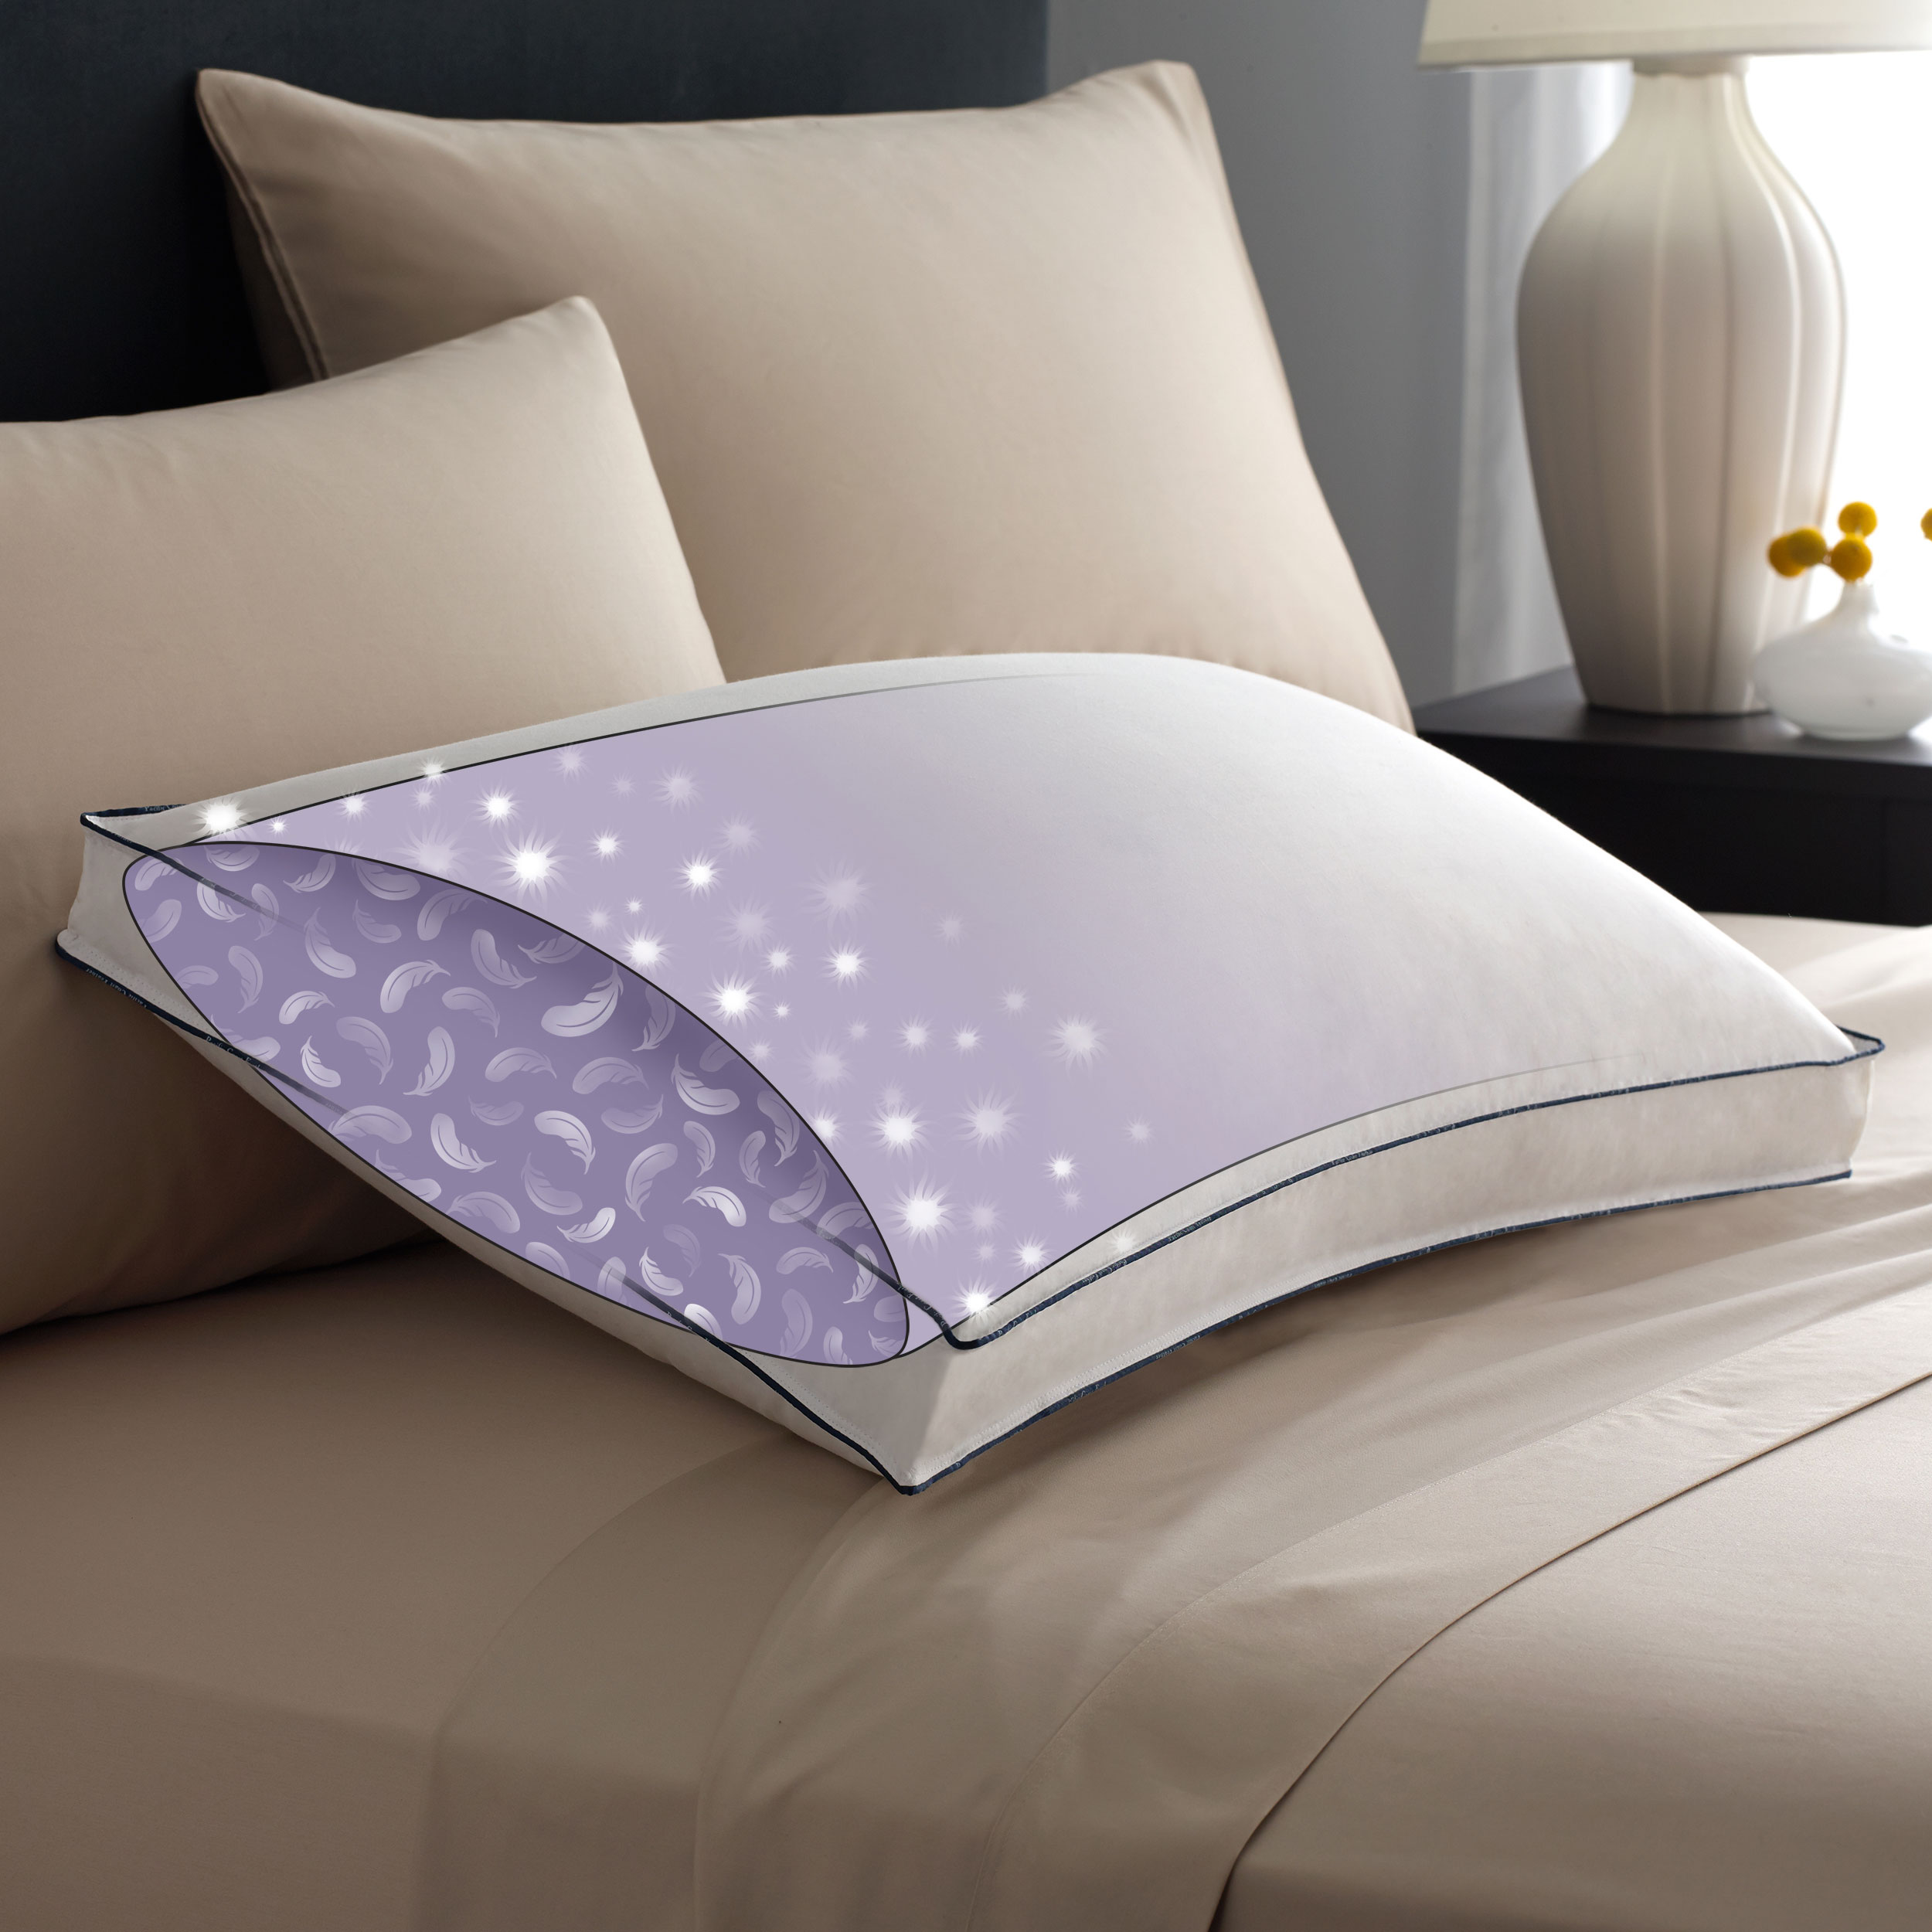 Large Pillows For Super King Bed Online